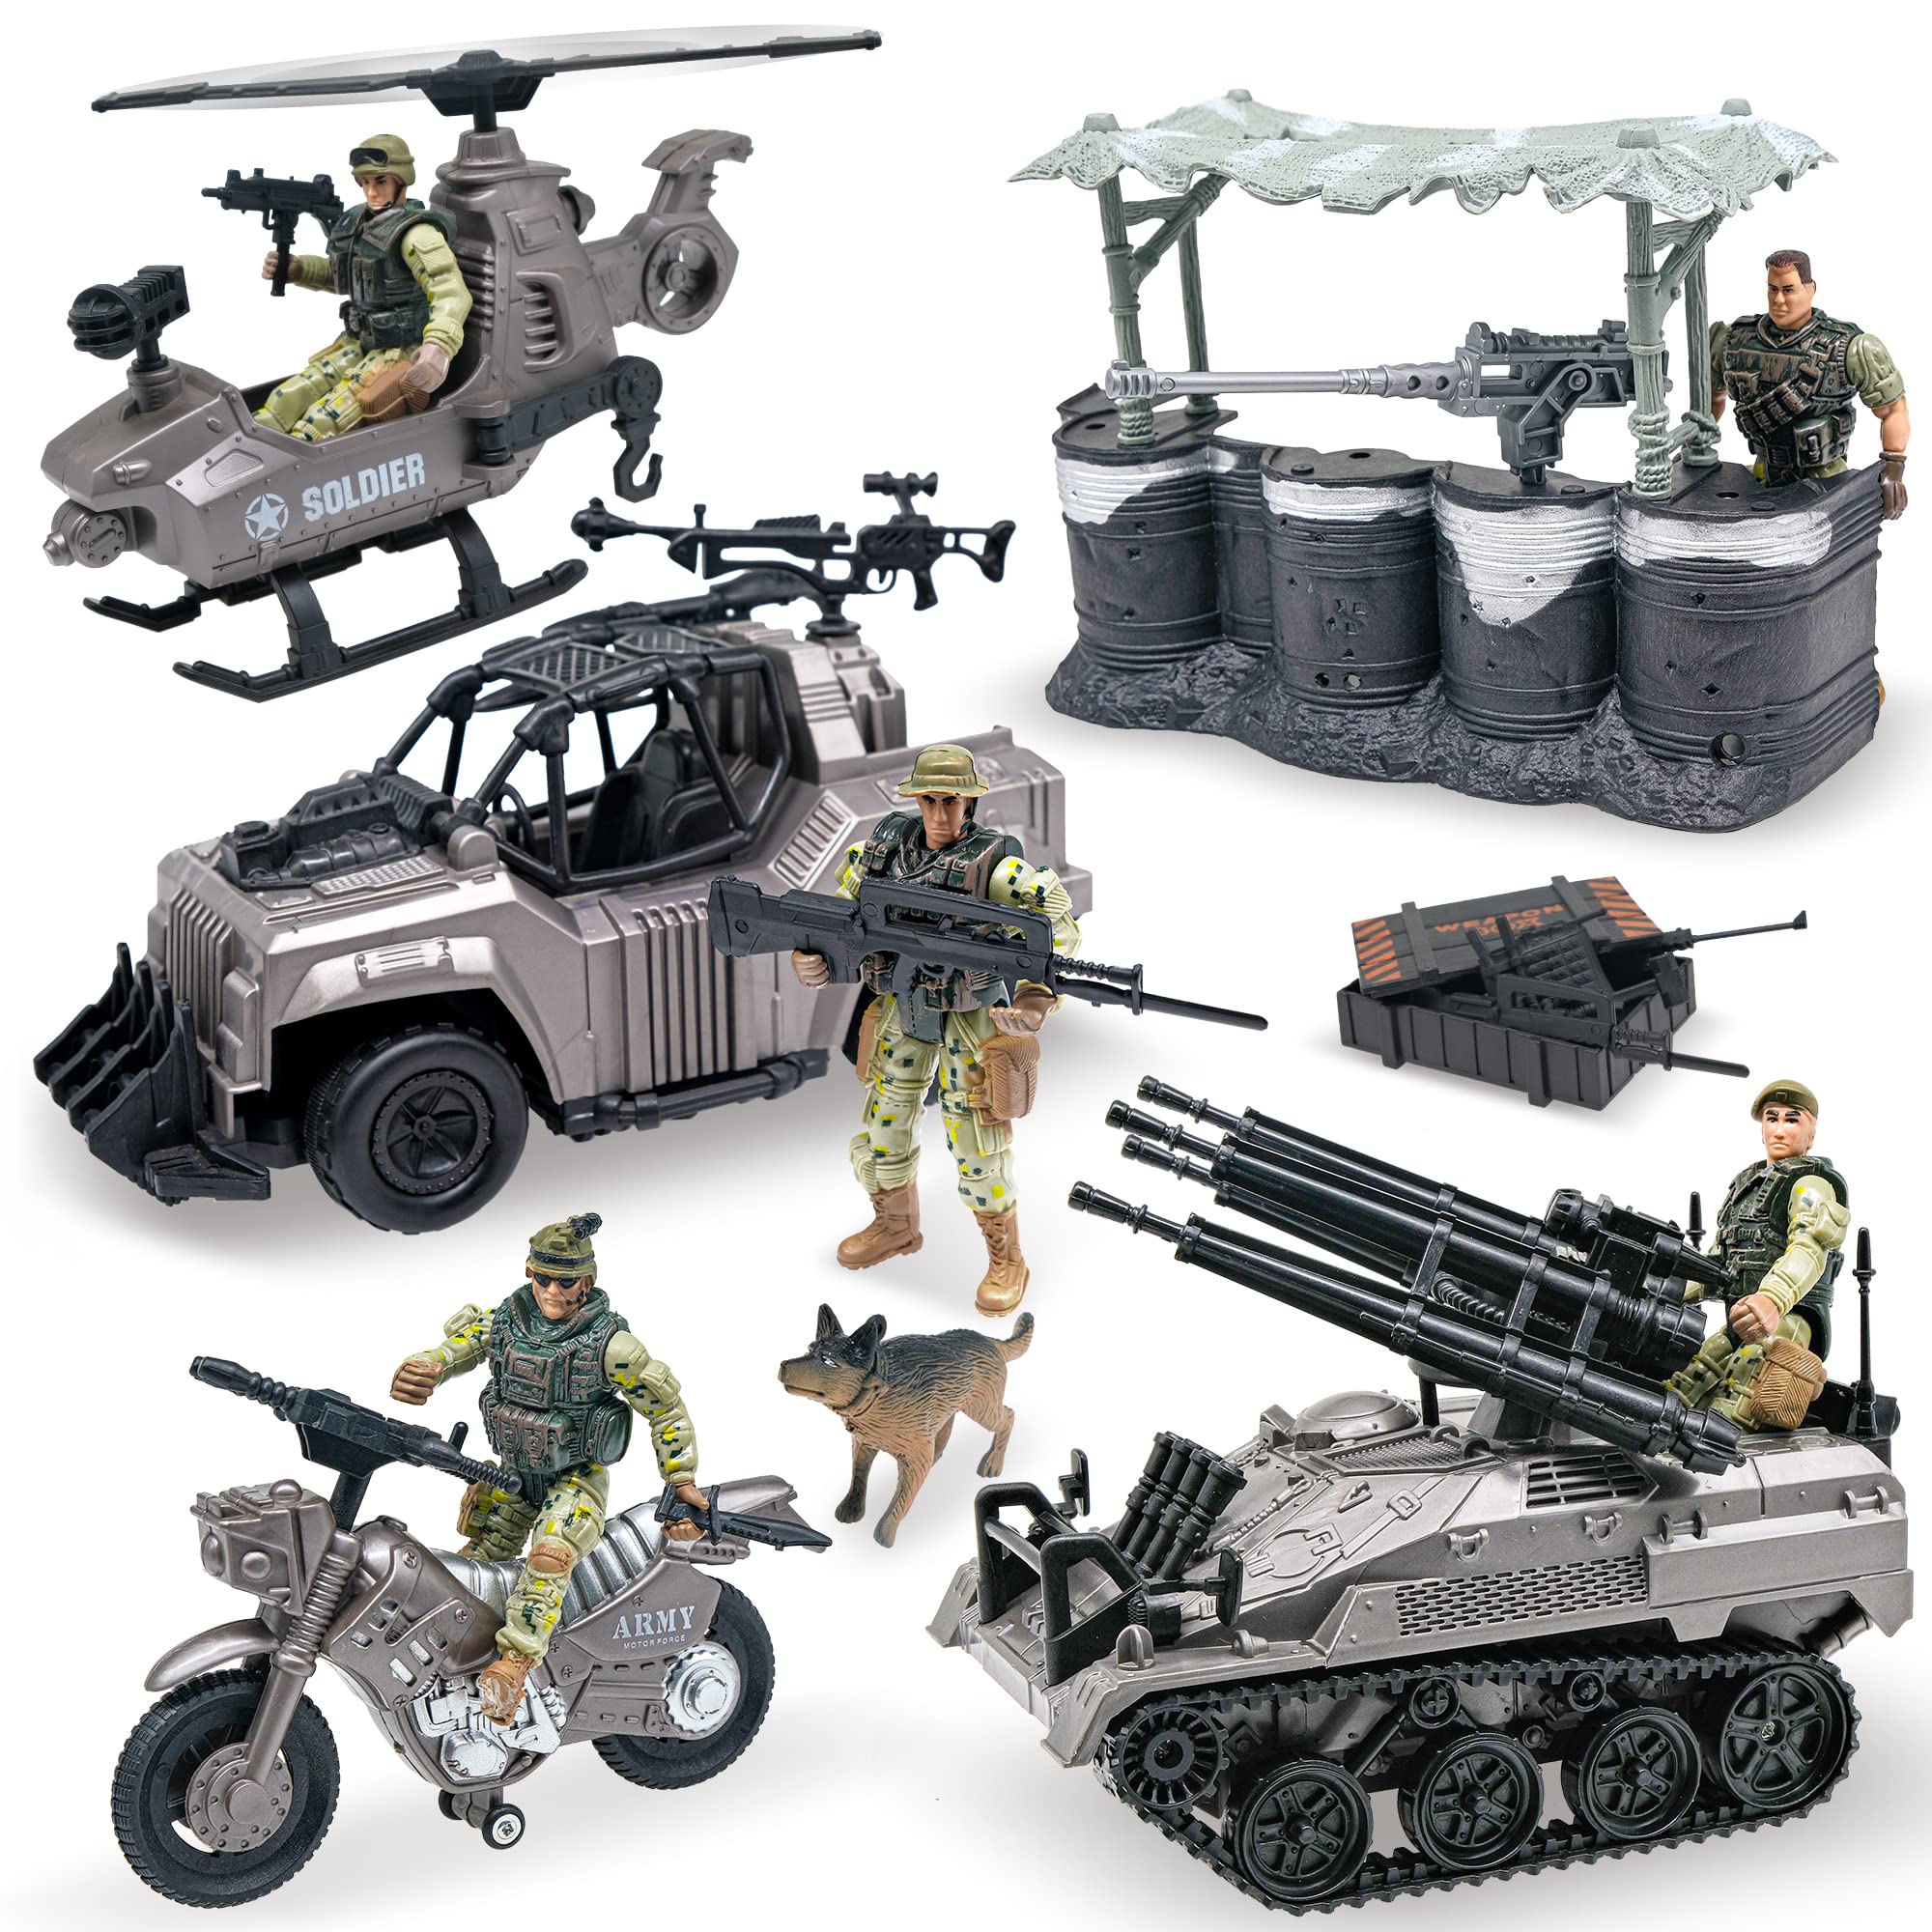 MISTBUY US Army Men Action Figures with Military Vehicles Toys Playset, Toy Soldiers with Military Trucks, Helicopter, War Tent for Kids Boys Girls, Best Age 6 7 8 9 10